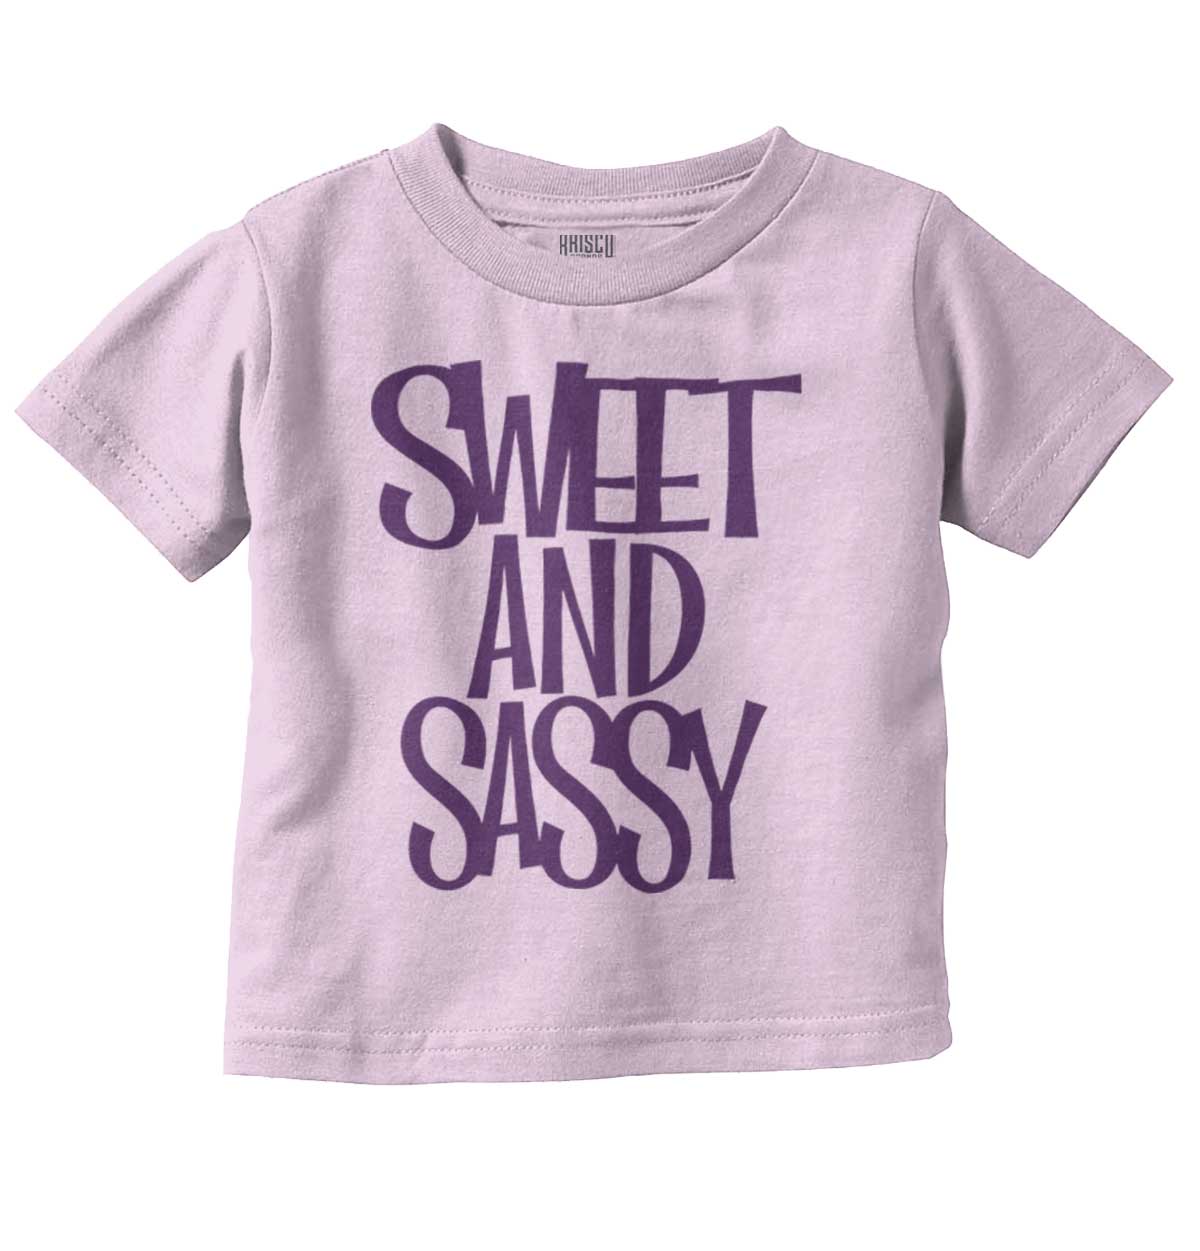 Sweet and Sassy Infant Toddler T-Shirt | Brisco Baby